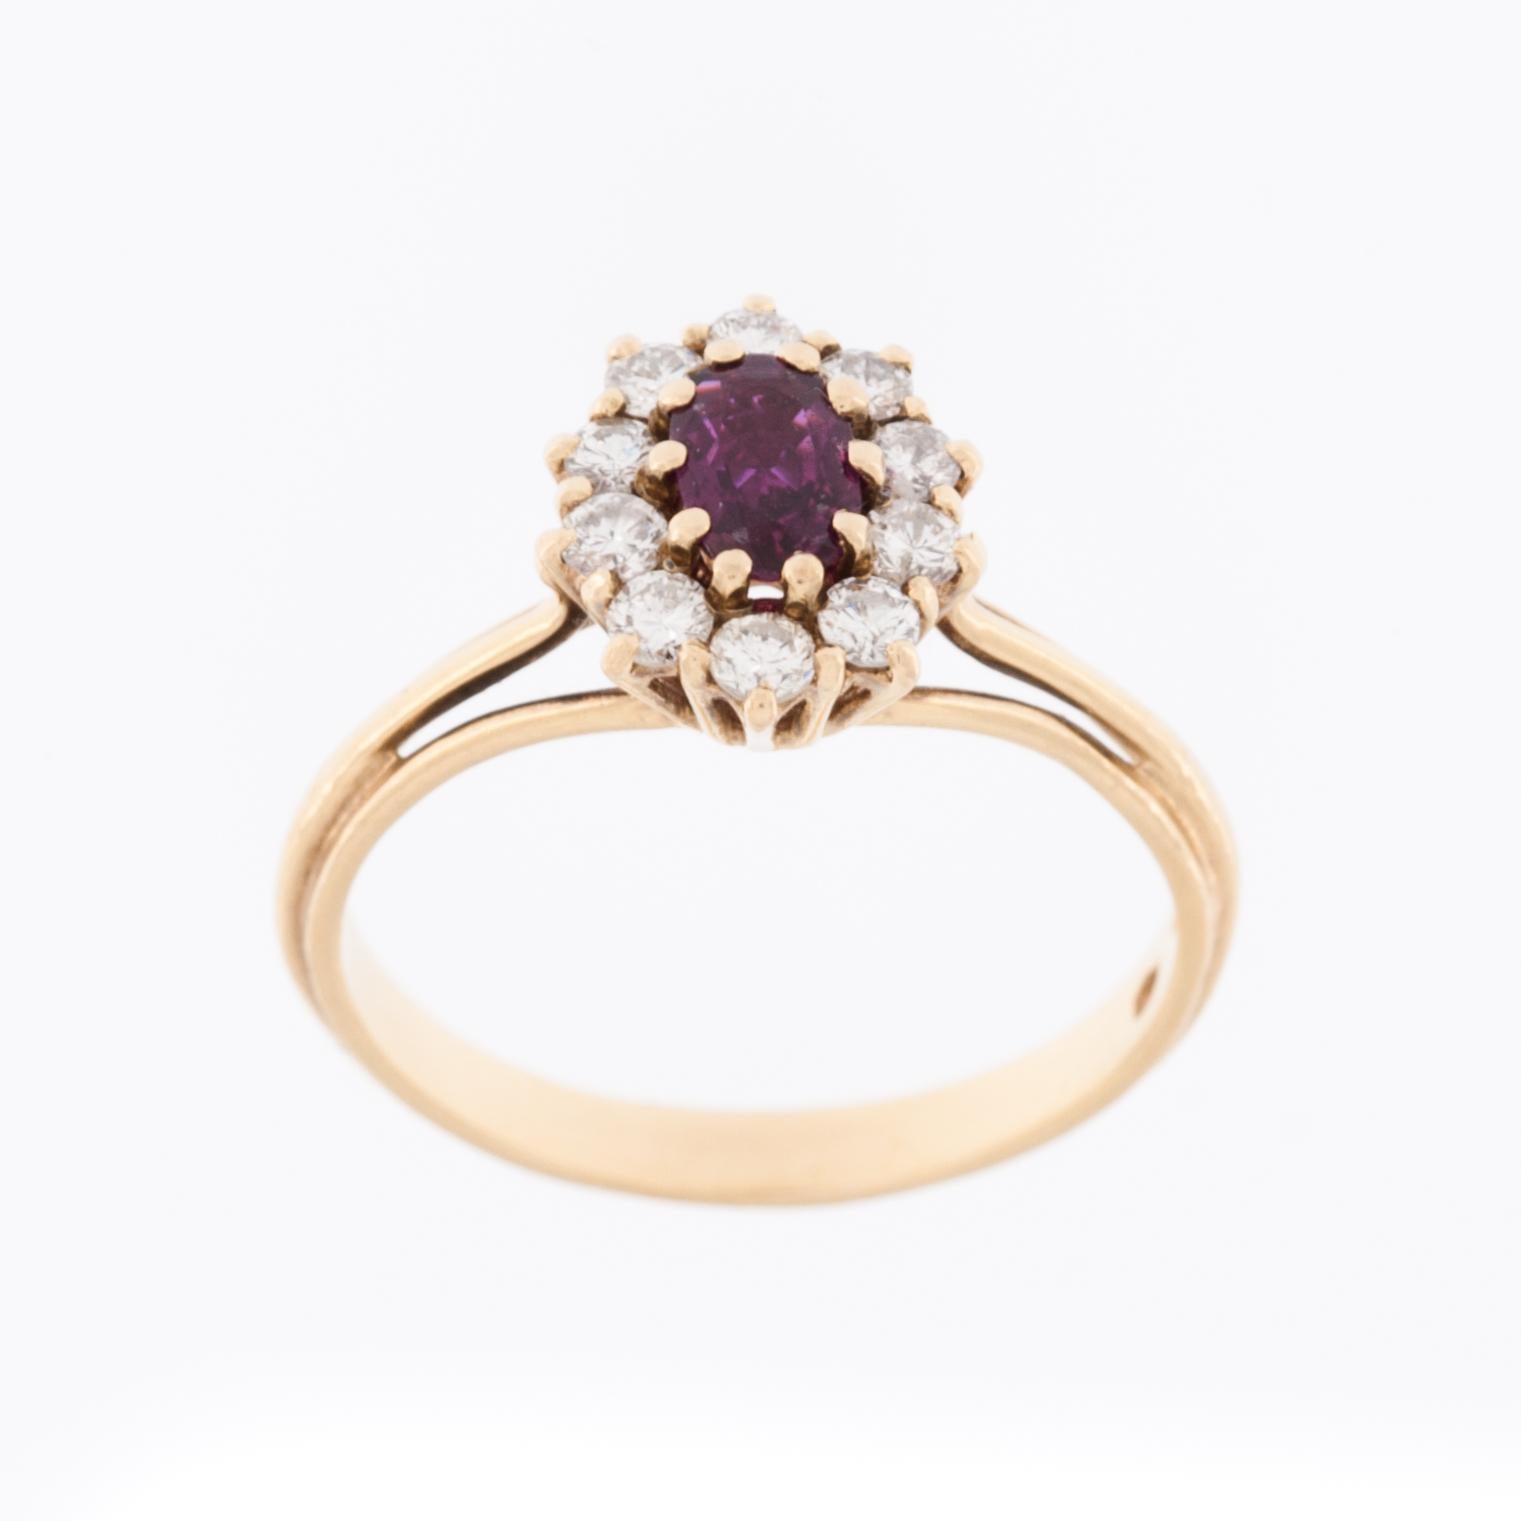 The Spanish Vintage Diamond and Ruby 18kt Yellow Gold Ring with claw setting is a luxurious and exquisite piece of jewelry that combines the timeless beauty of diamonds and rubies with the elegance of 18kt yellow gold.

Ancient Hindu and Burmese